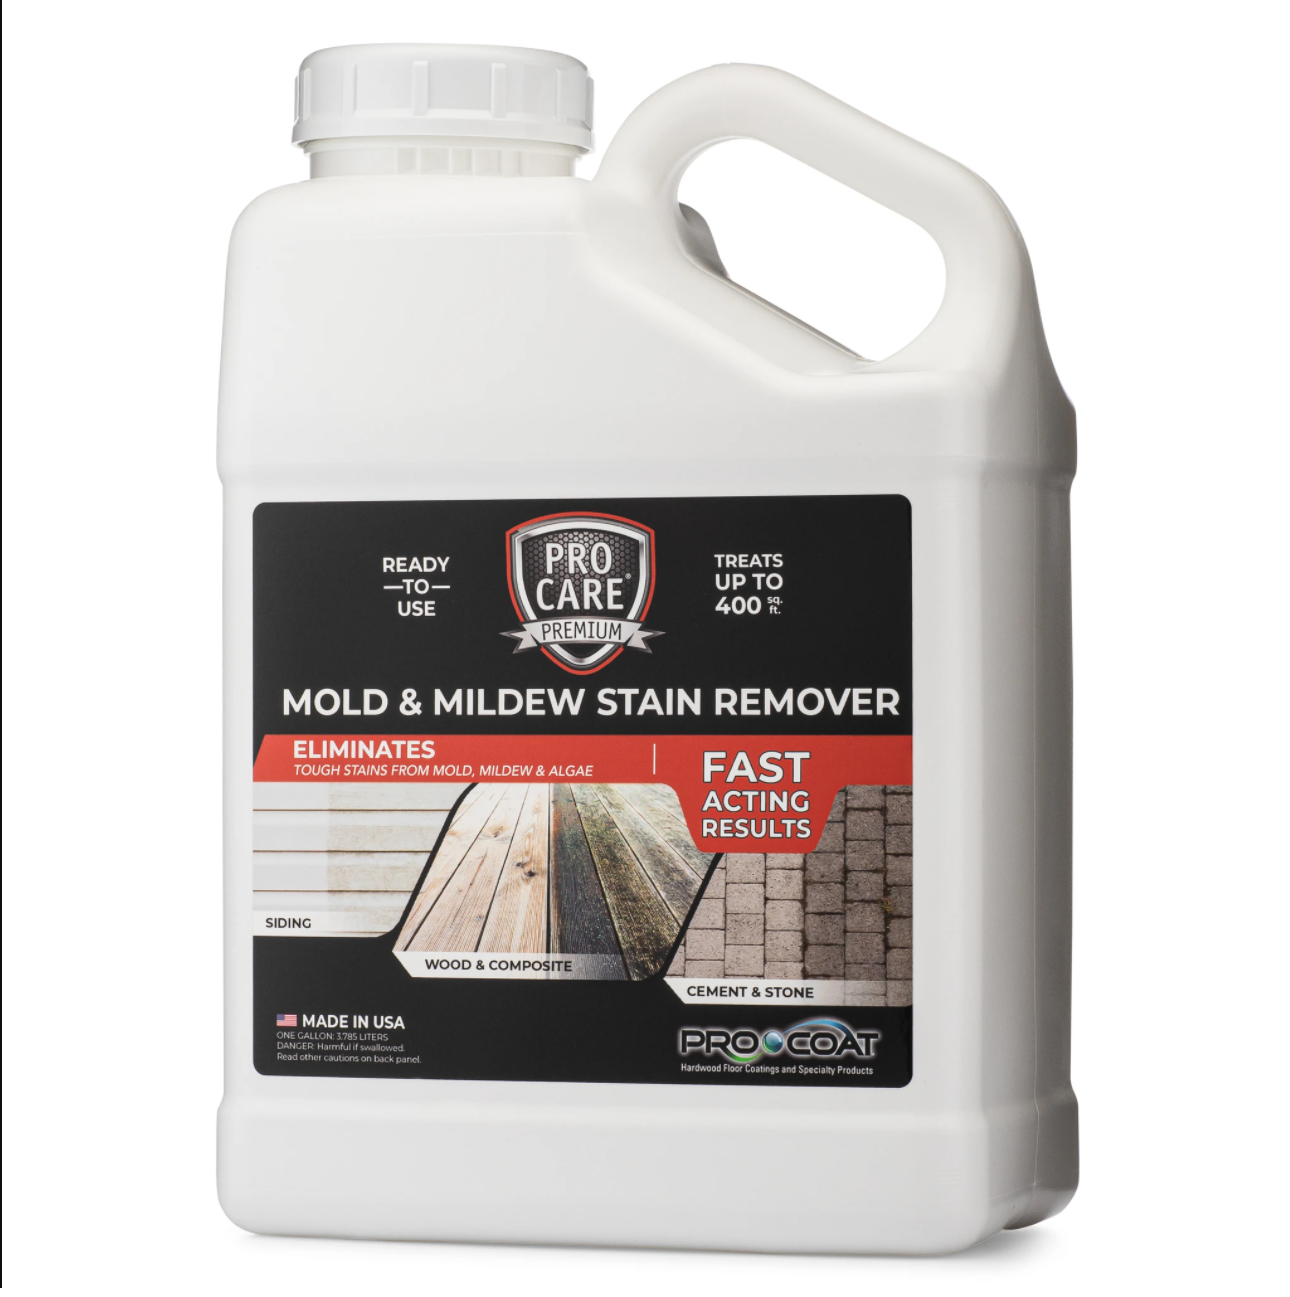 Sanitizer Plus Antimicrobial Professional Mold And Mildew Remover